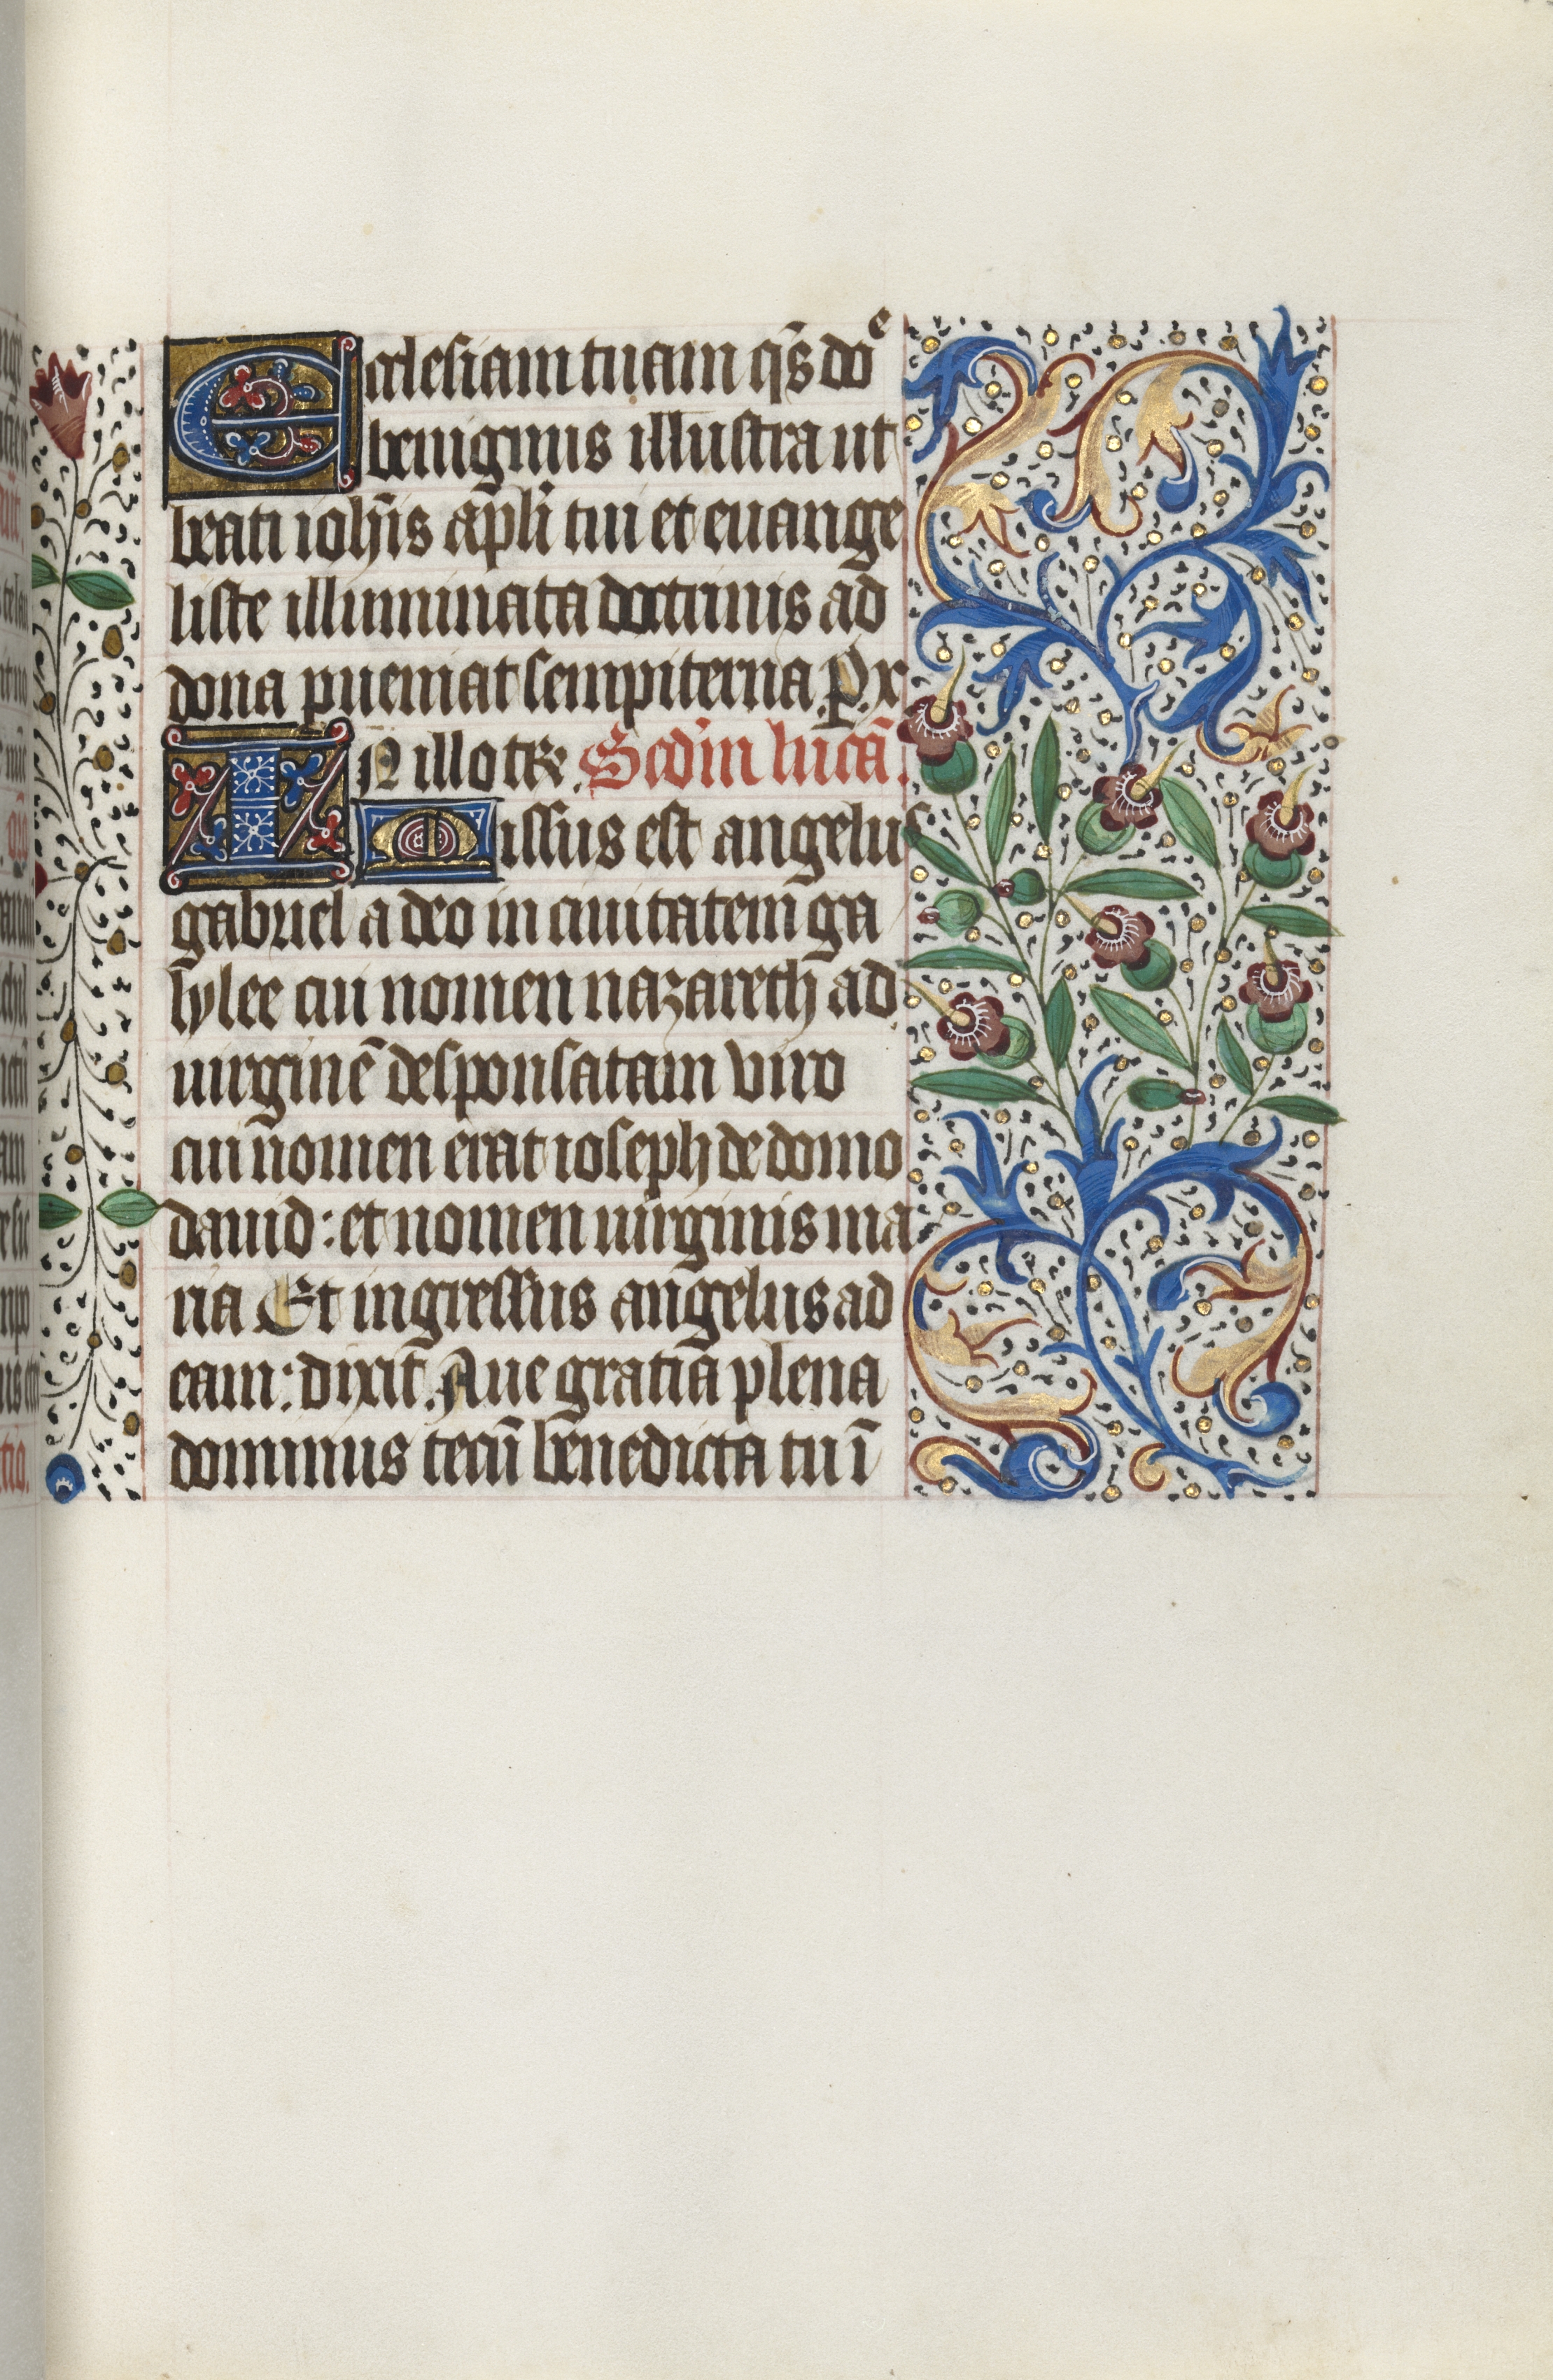 Book of Hours (Use of Rouen): fol. 141r, Opening of the Gospel of Luke